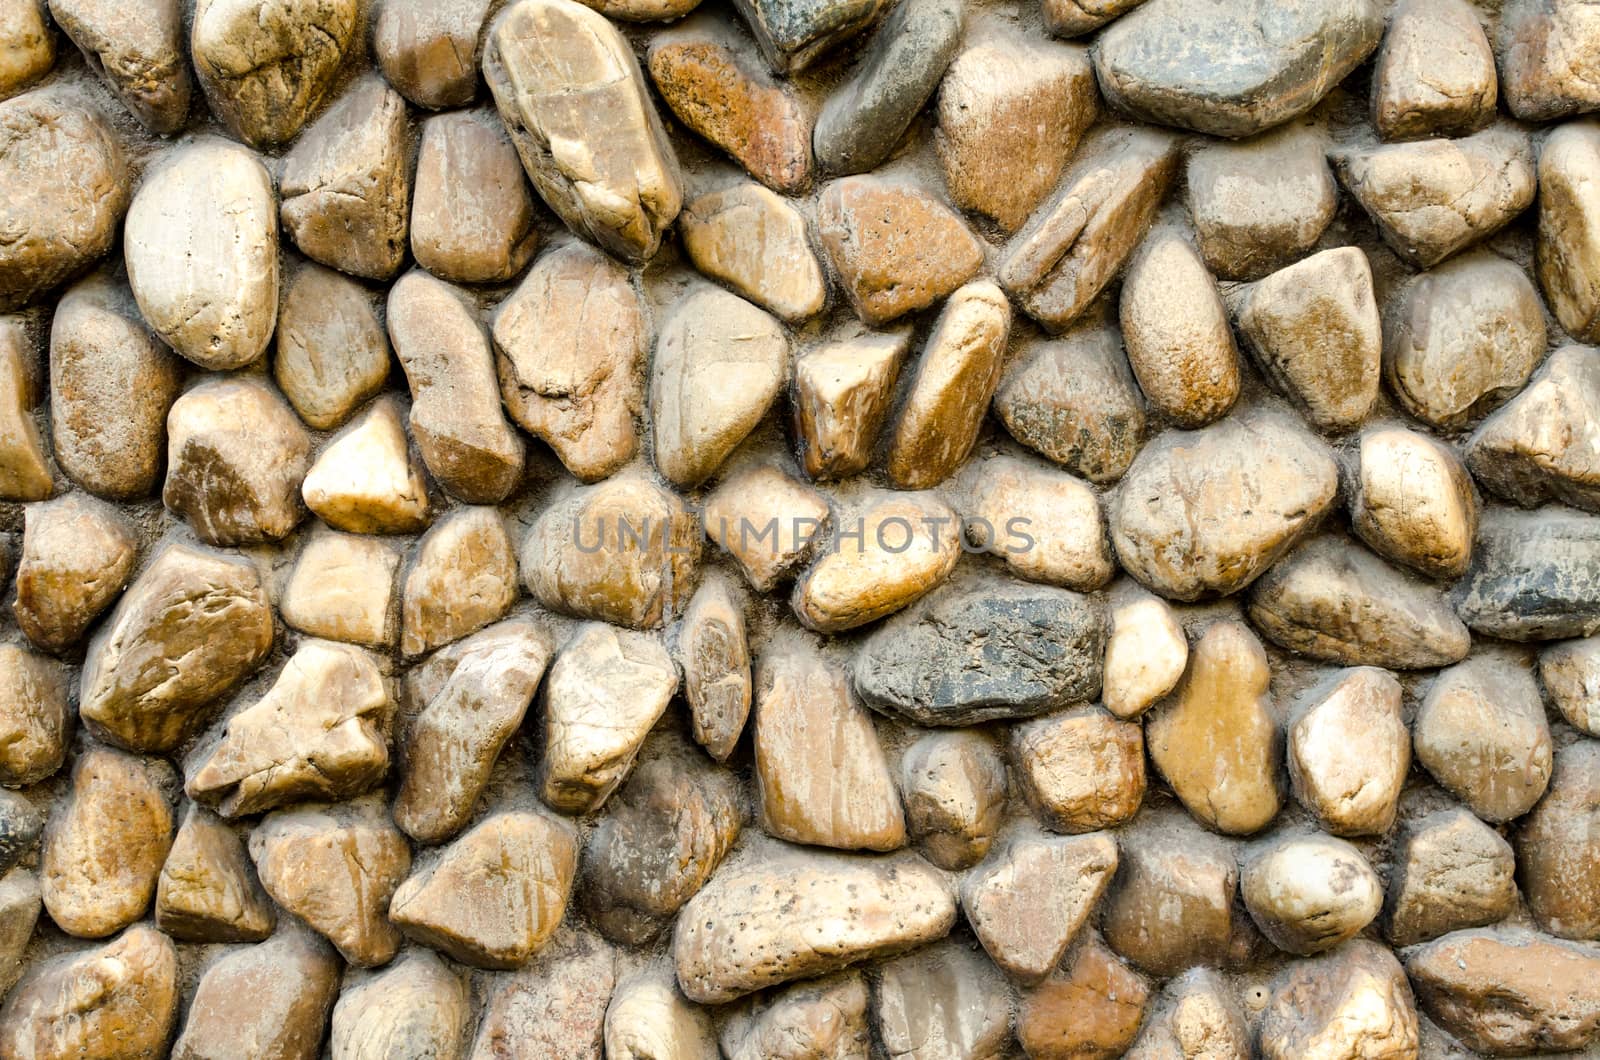 Stone wall. Texture of different forms stones similar to wall.